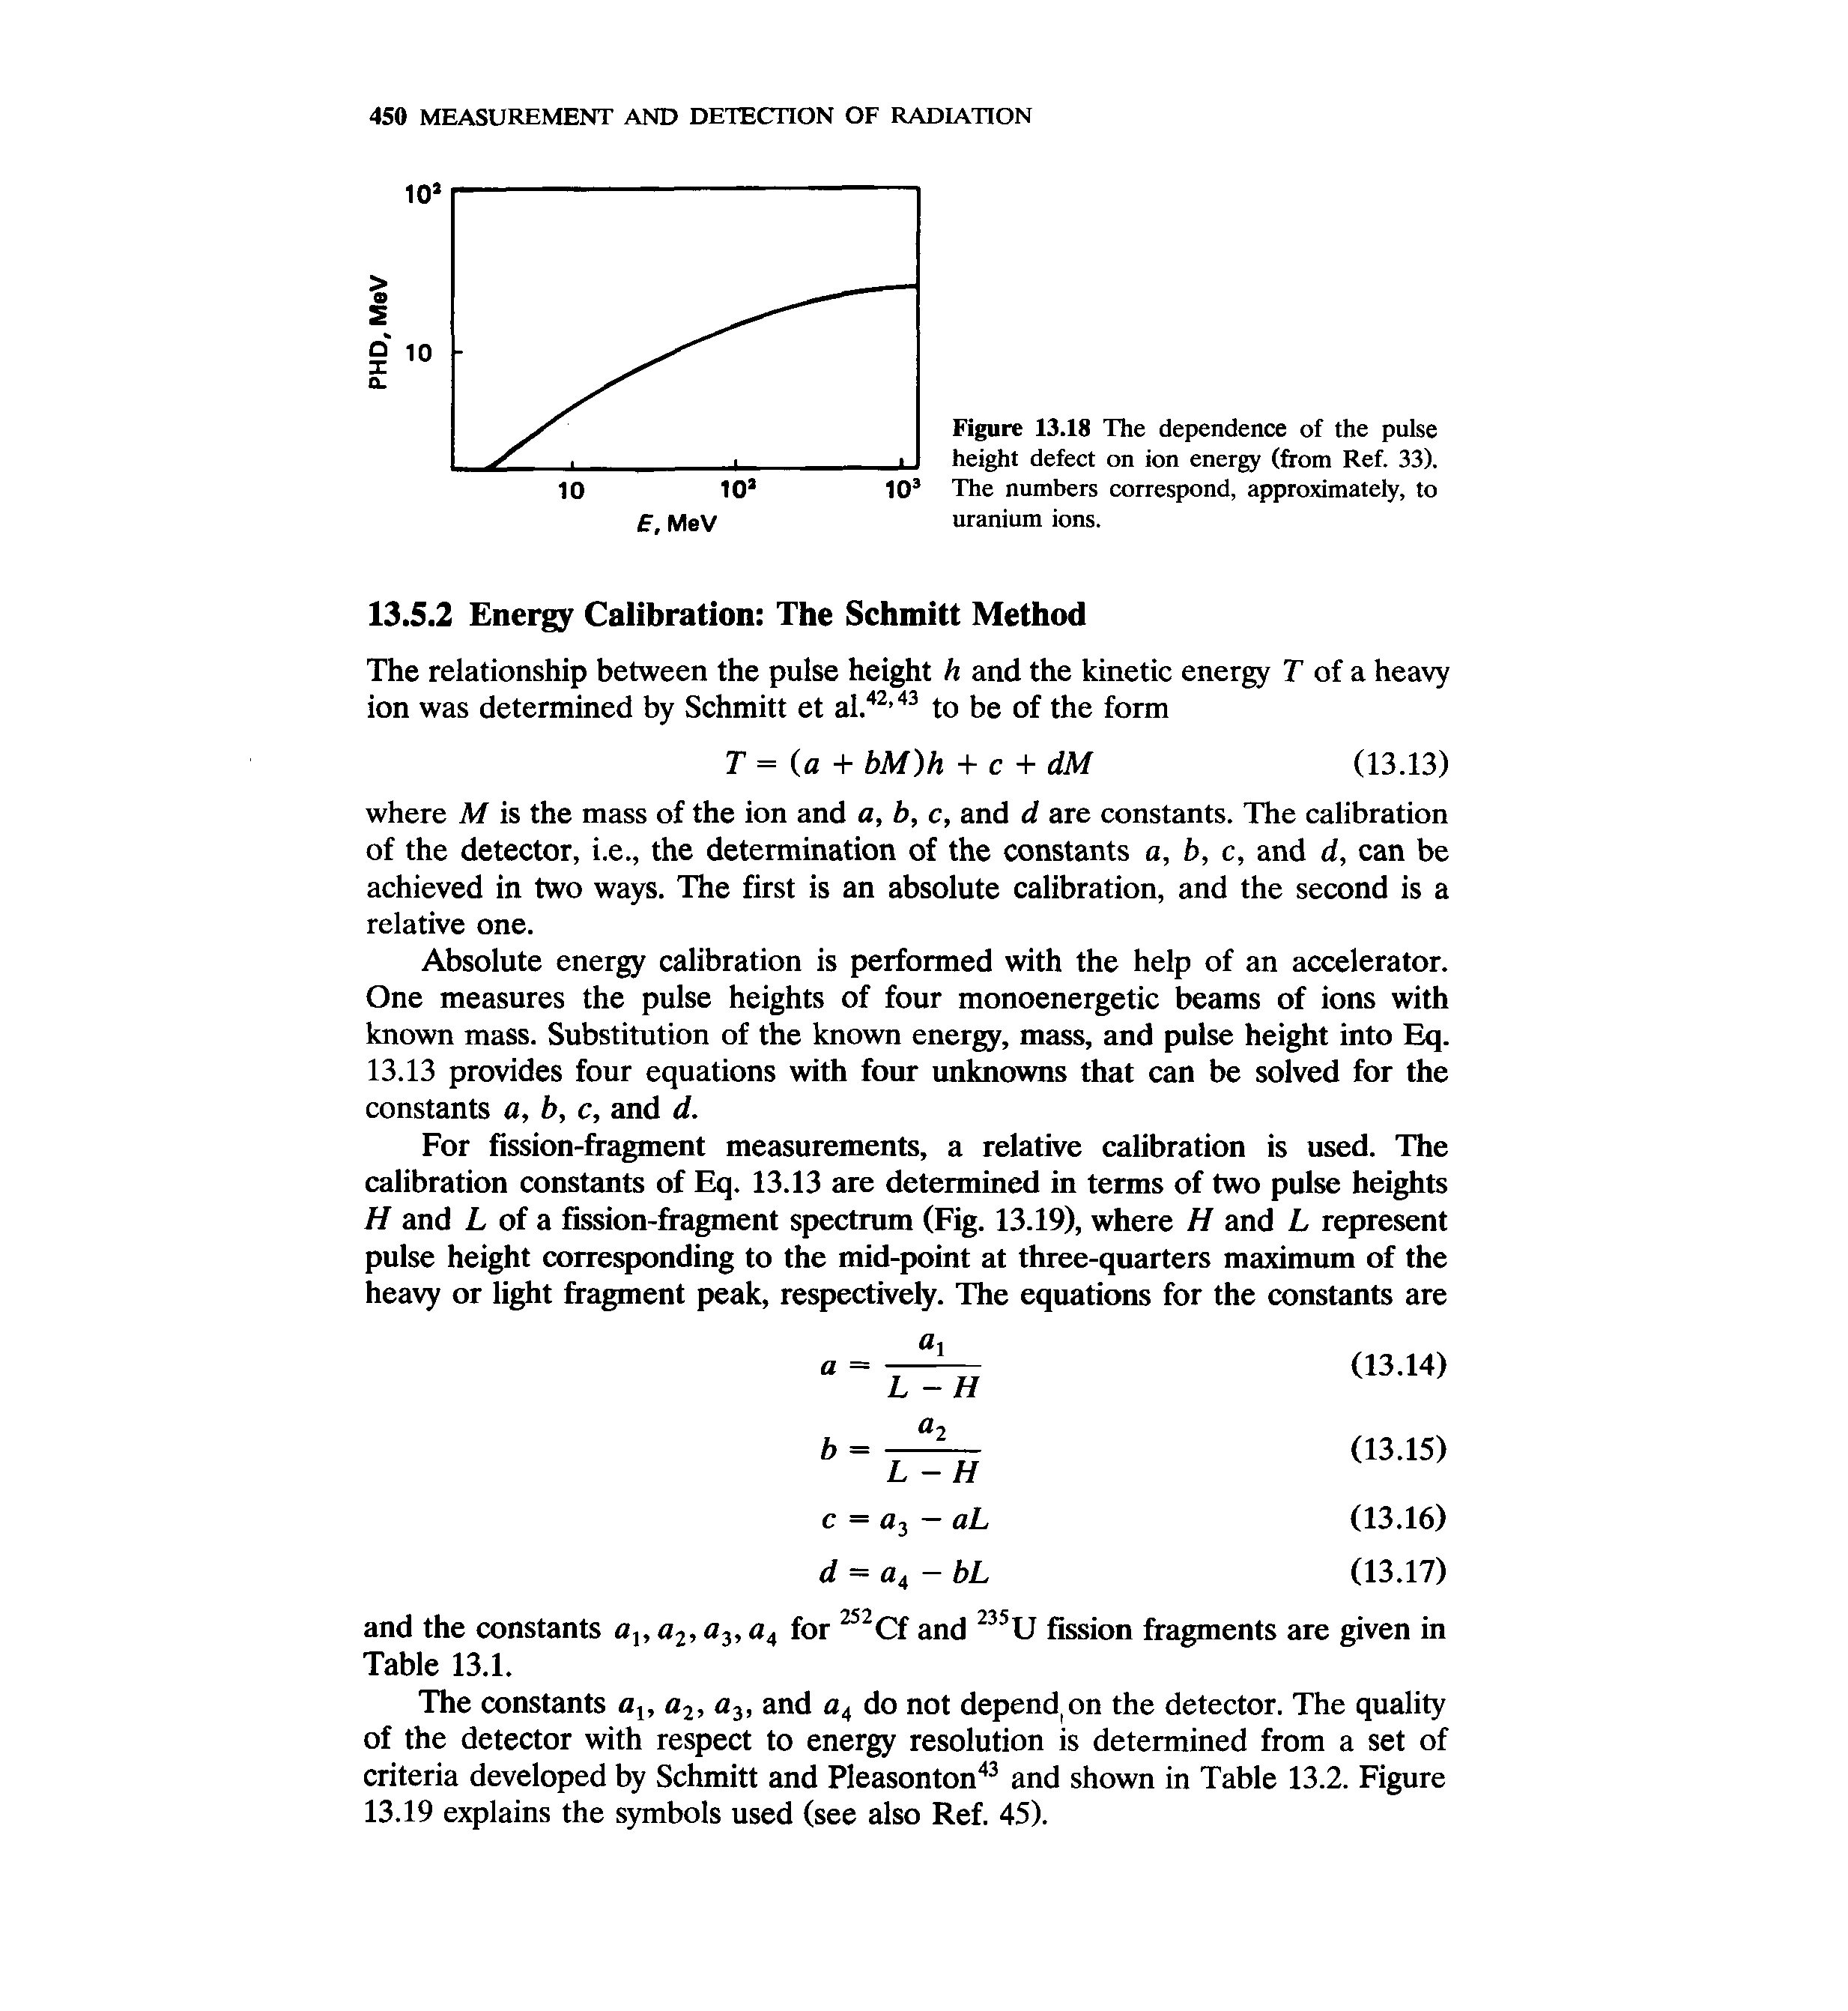 Figure 13.18 The dependence of the pulse height defect on ion energy (from Ref. 33). The numbers correspond, approximately, to uranium ions.